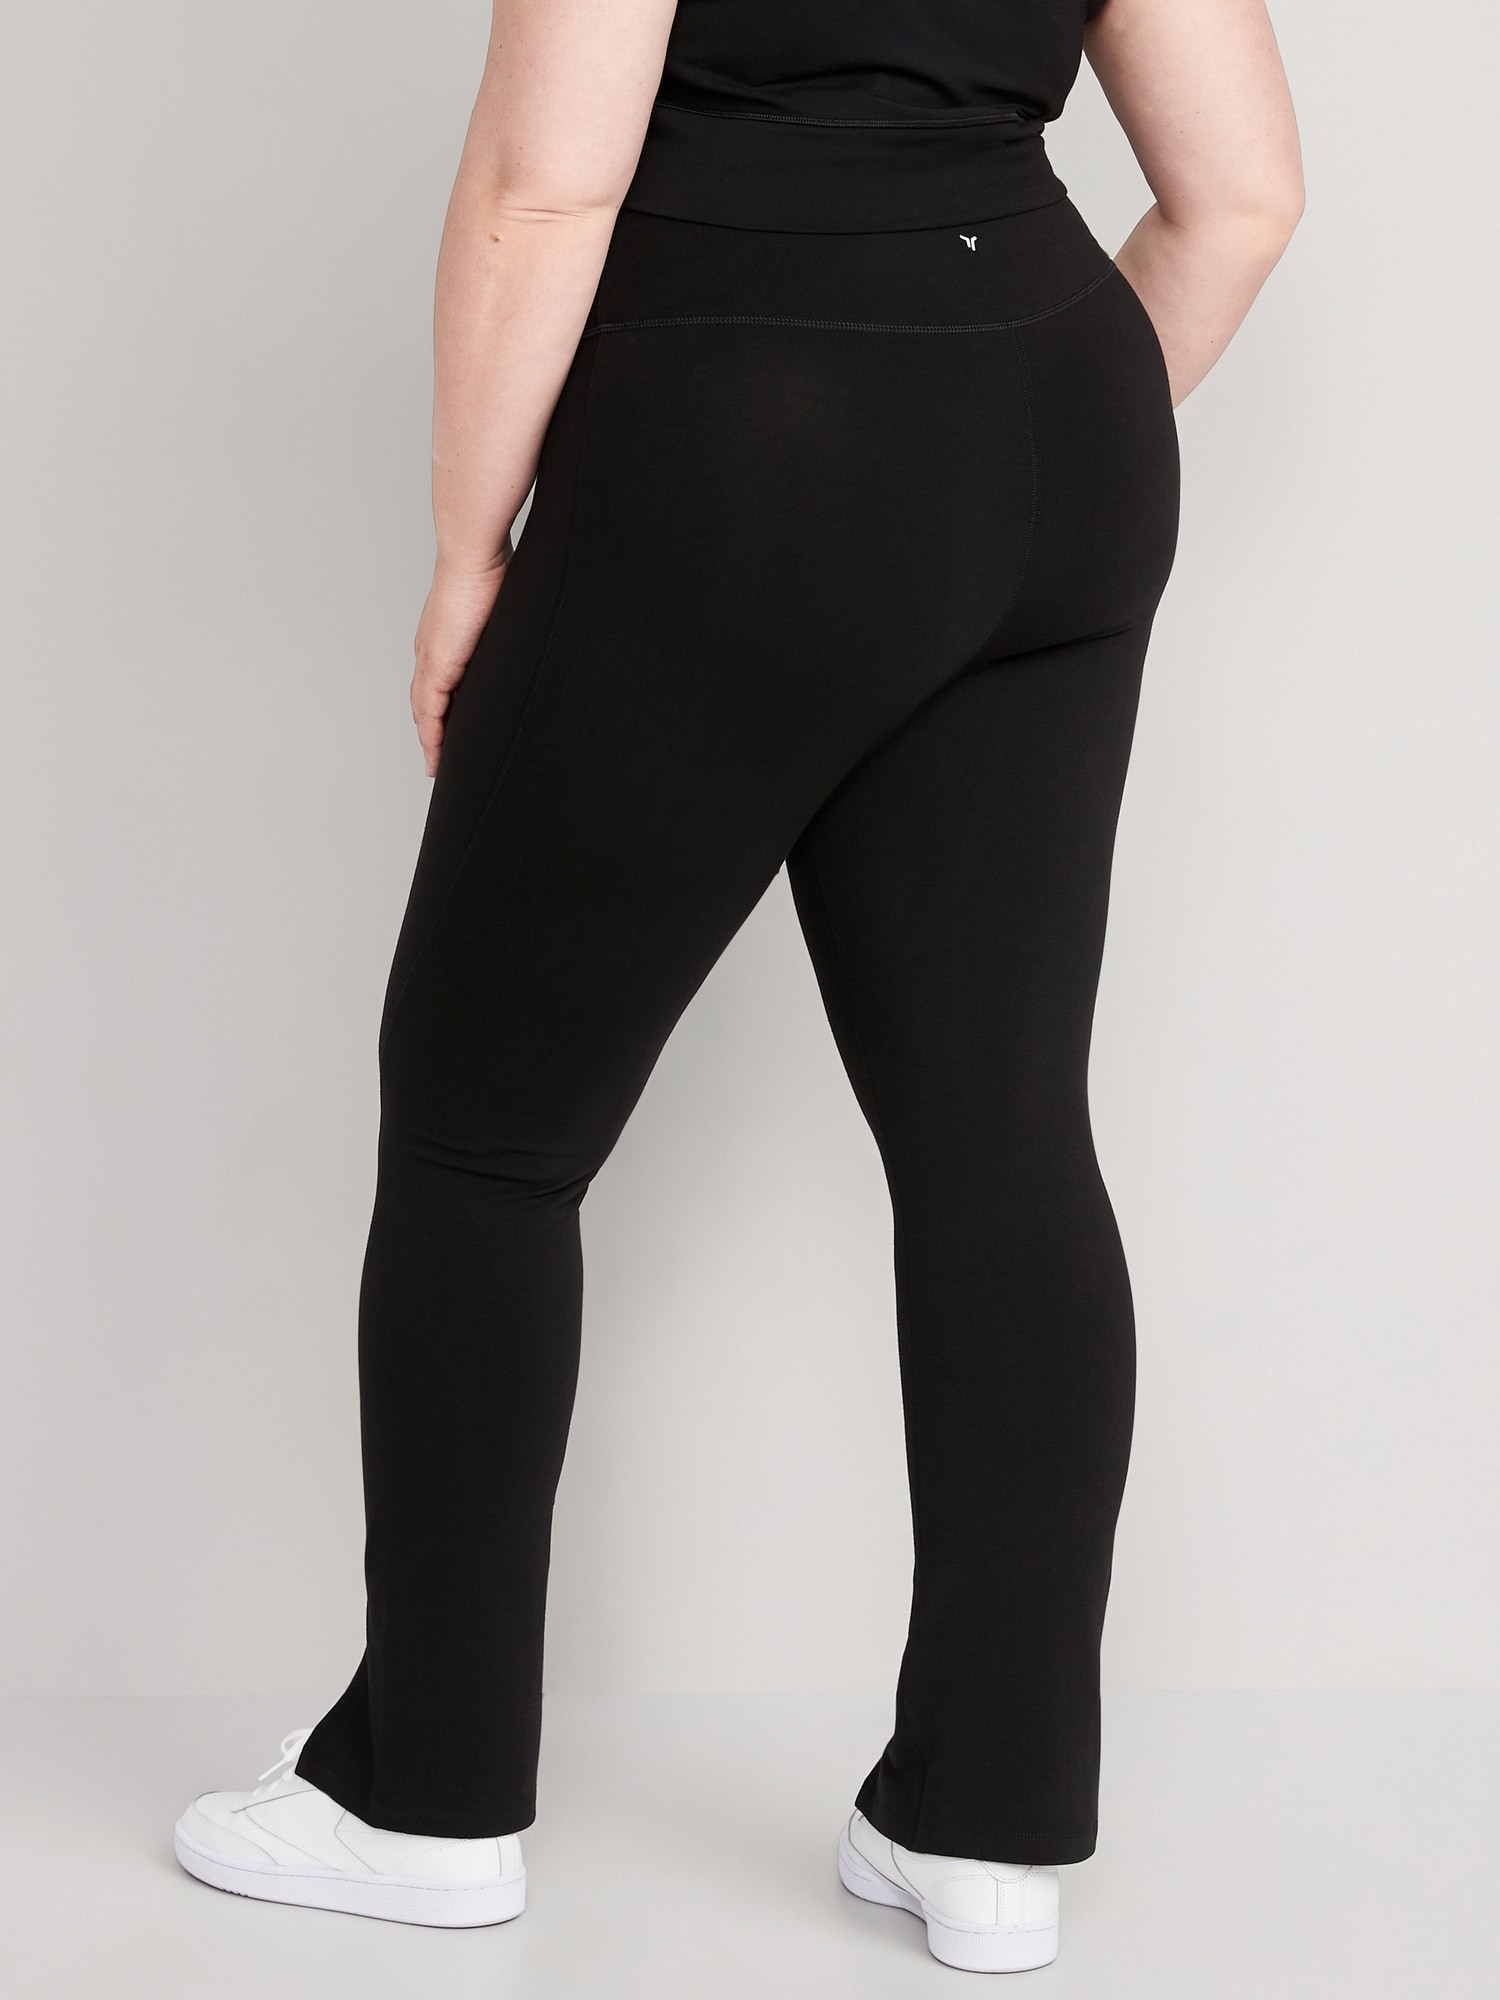 Divided by H&M Black Leggings Size XL - 23% off